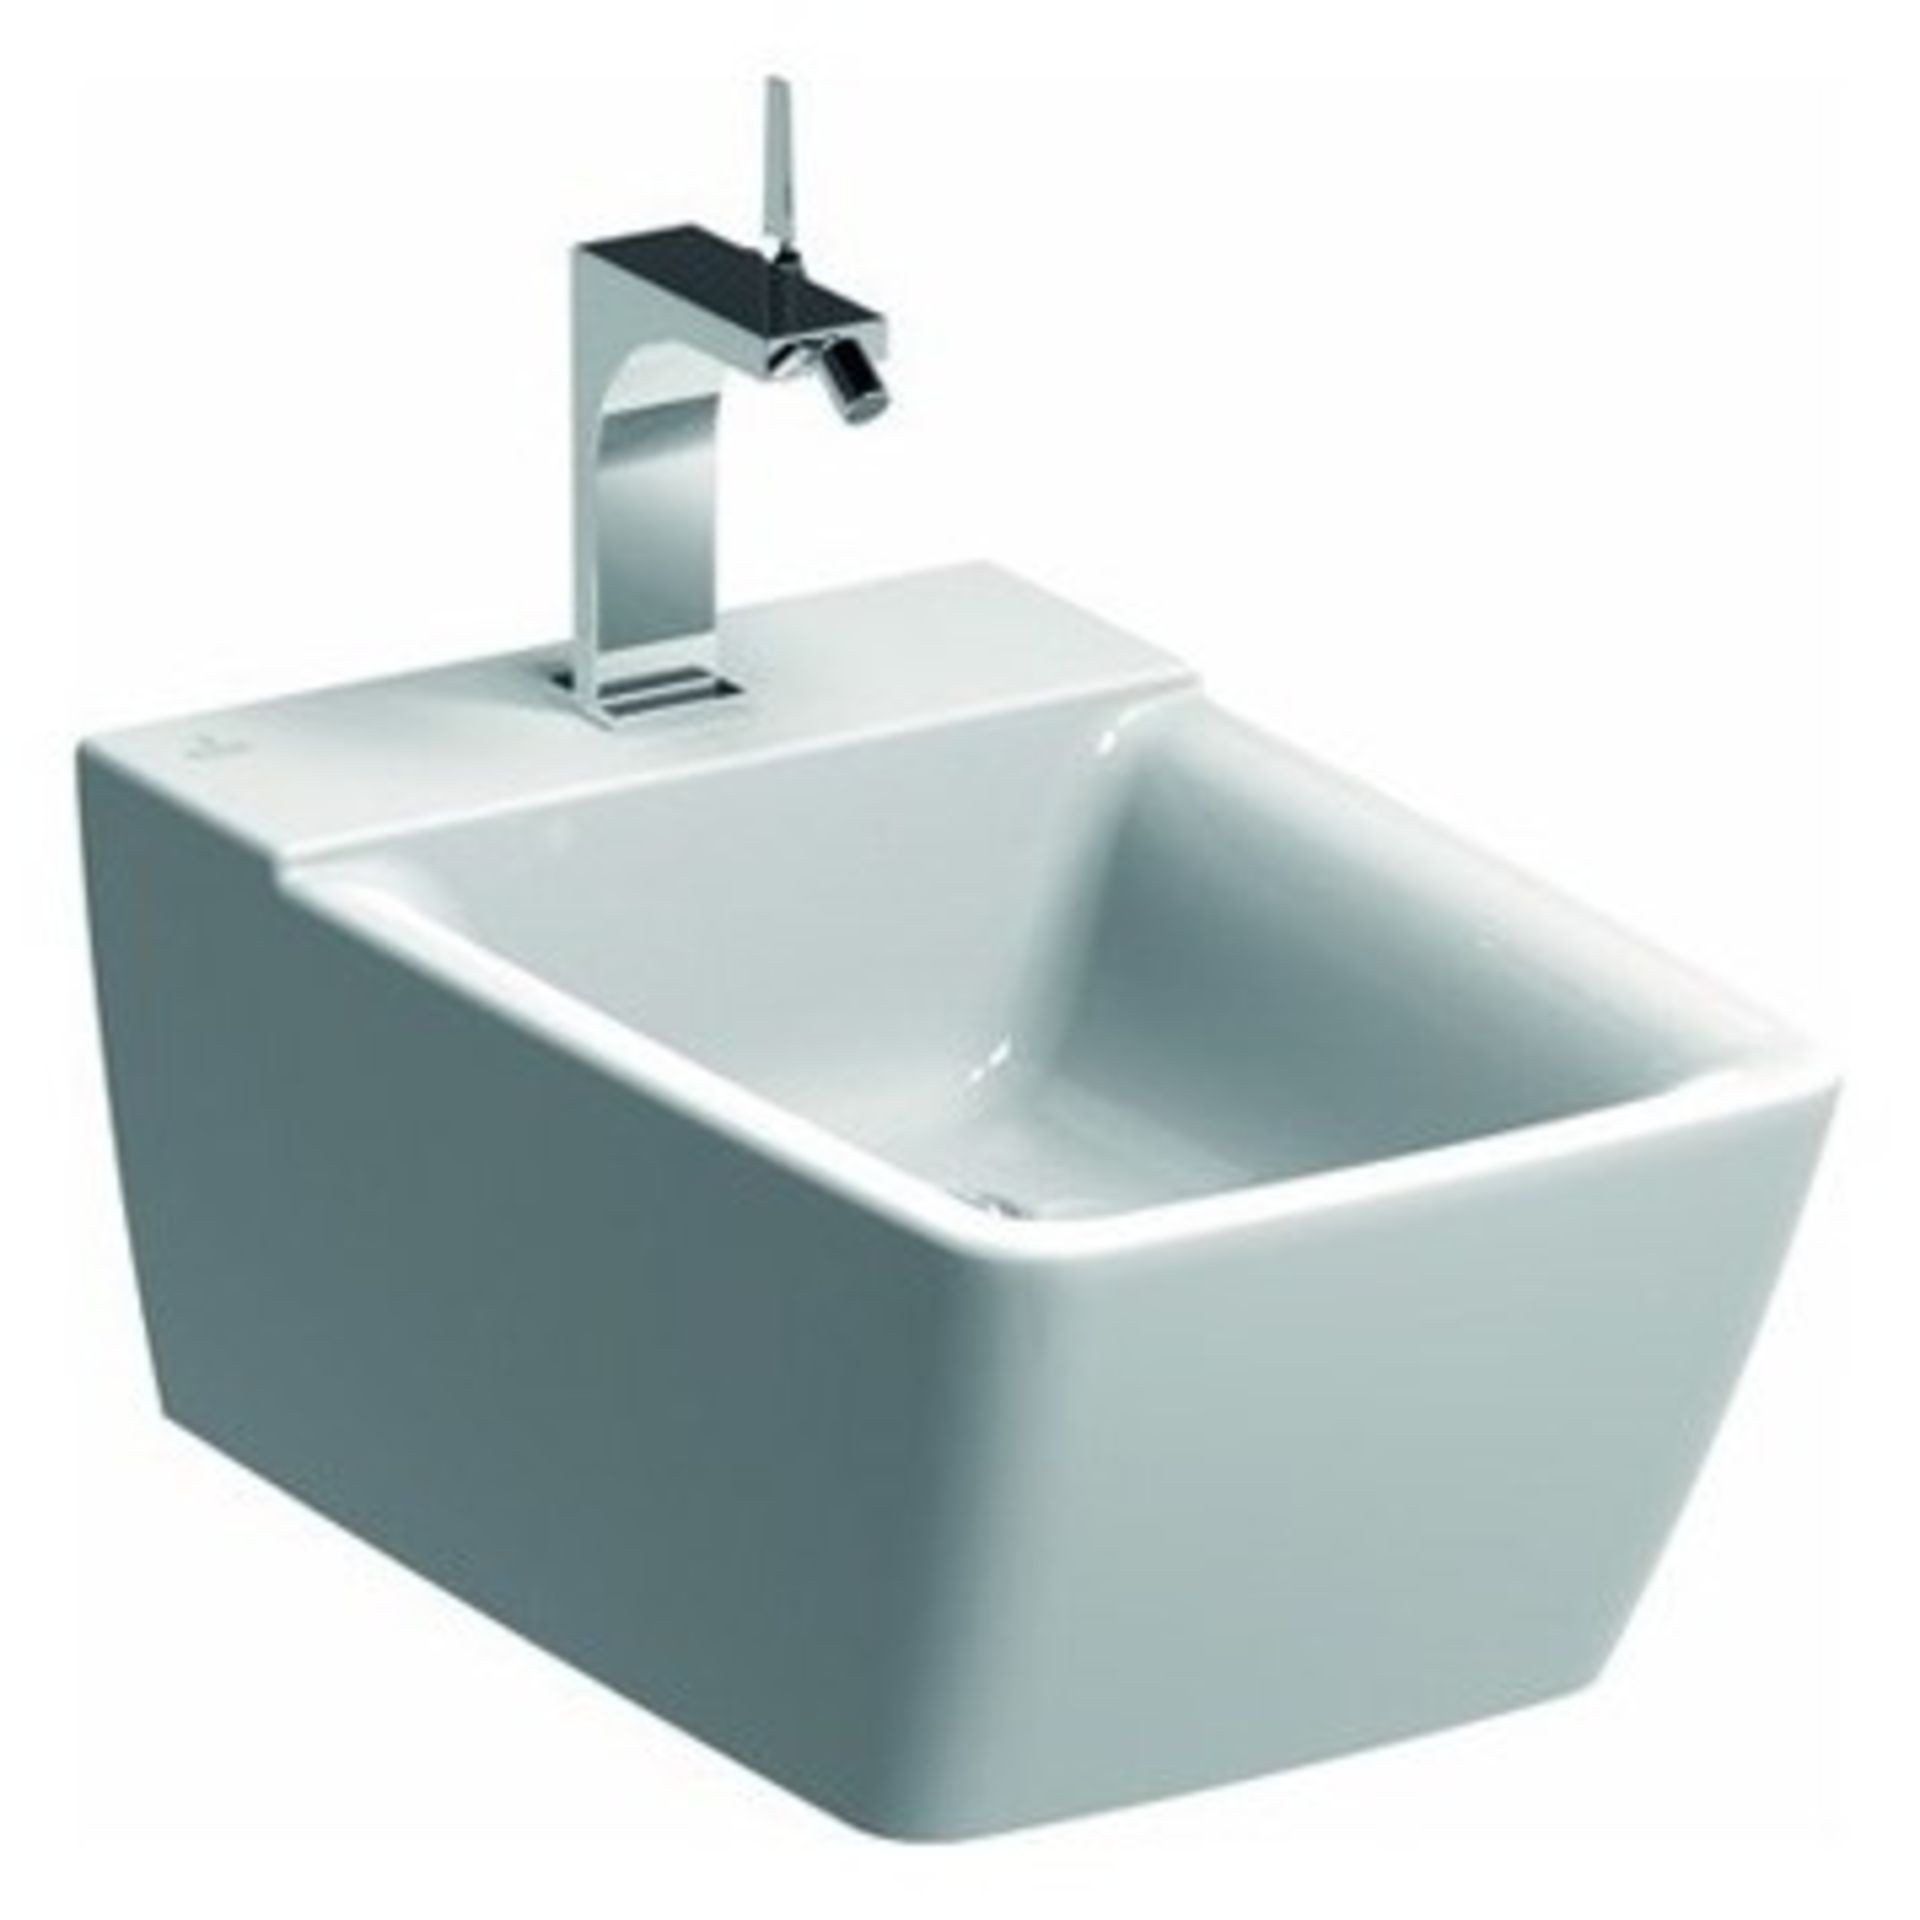 (PC58) Xeno 540mm Bidet Wall Hung. RRP £389.99.A premium bathroom series of products with rema...( - Image 2 of 2